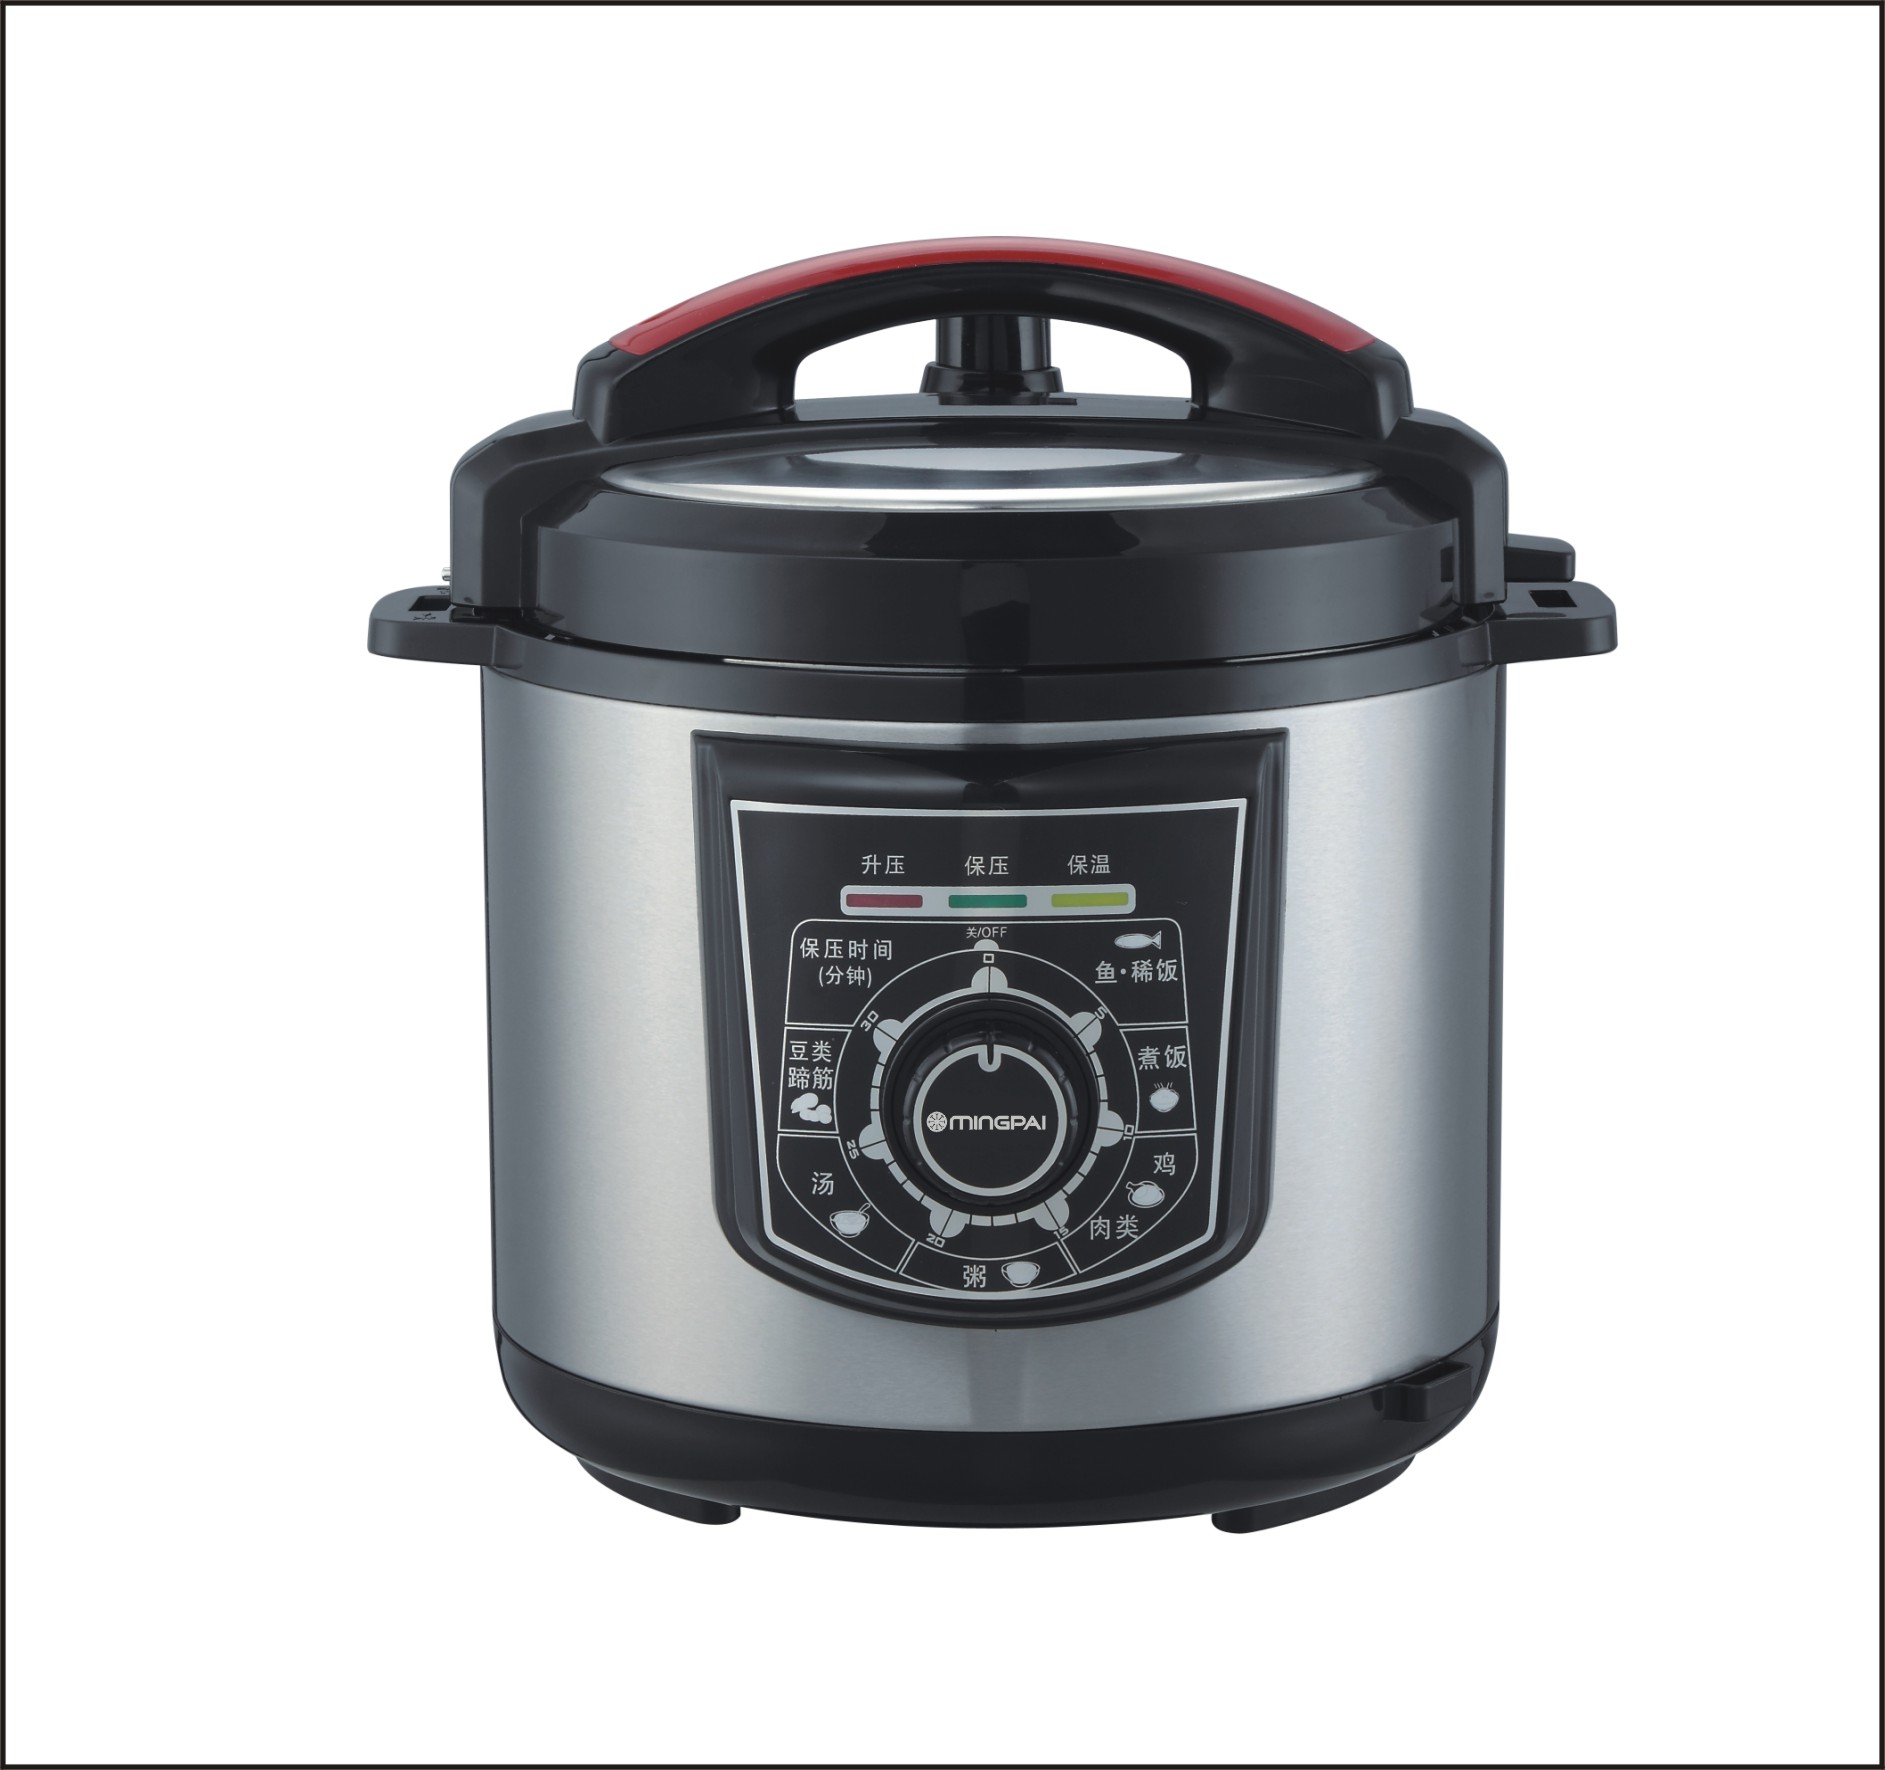 Multi function, 8 multiple safety protections, safe & convenient electrical pressure cooker